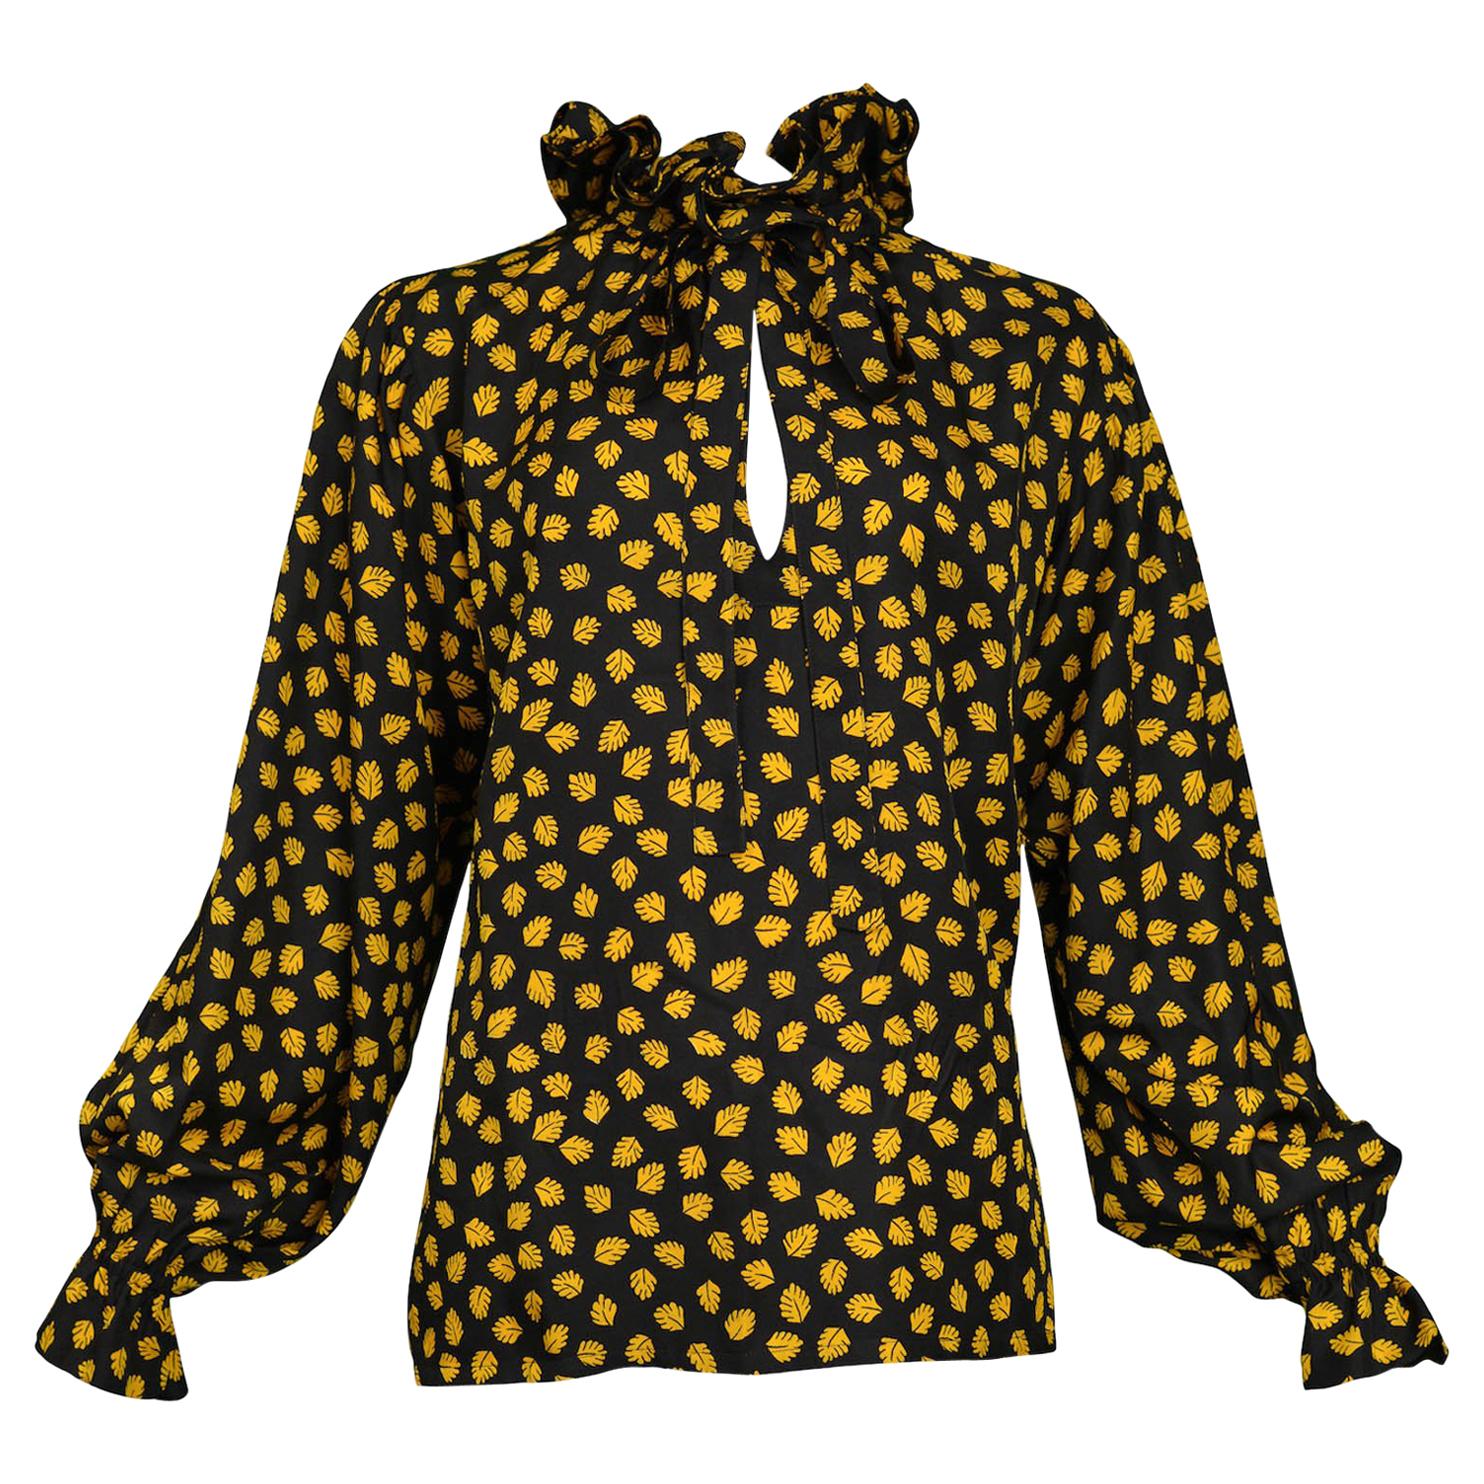 Yves Saint Laurent Yellow and Black Leaf Print Blouse, 1970s 